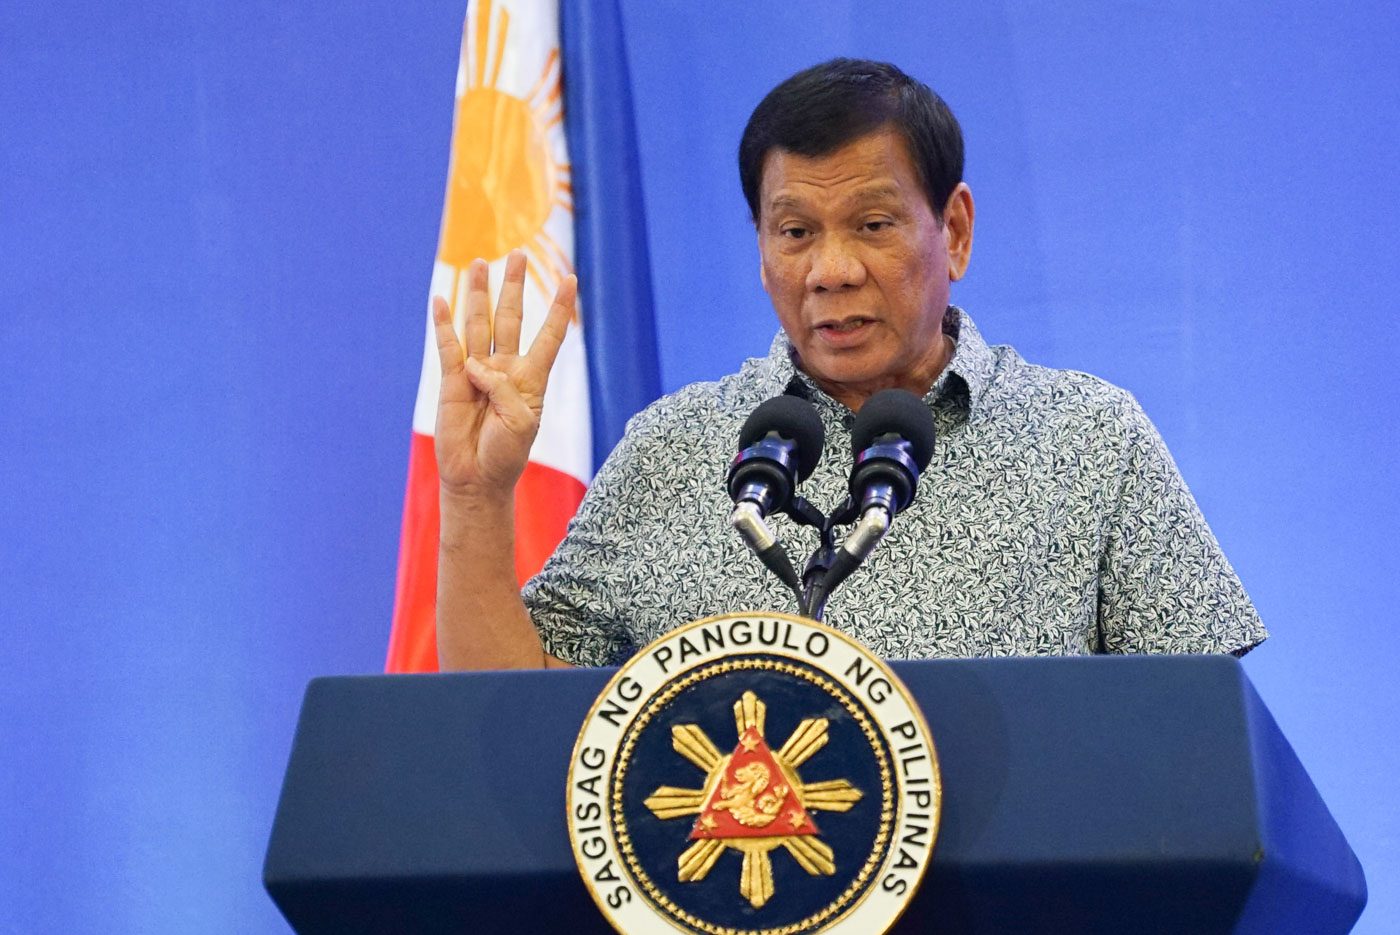 Trust in Duterte erodes among poor, improves among rich – SWS poll